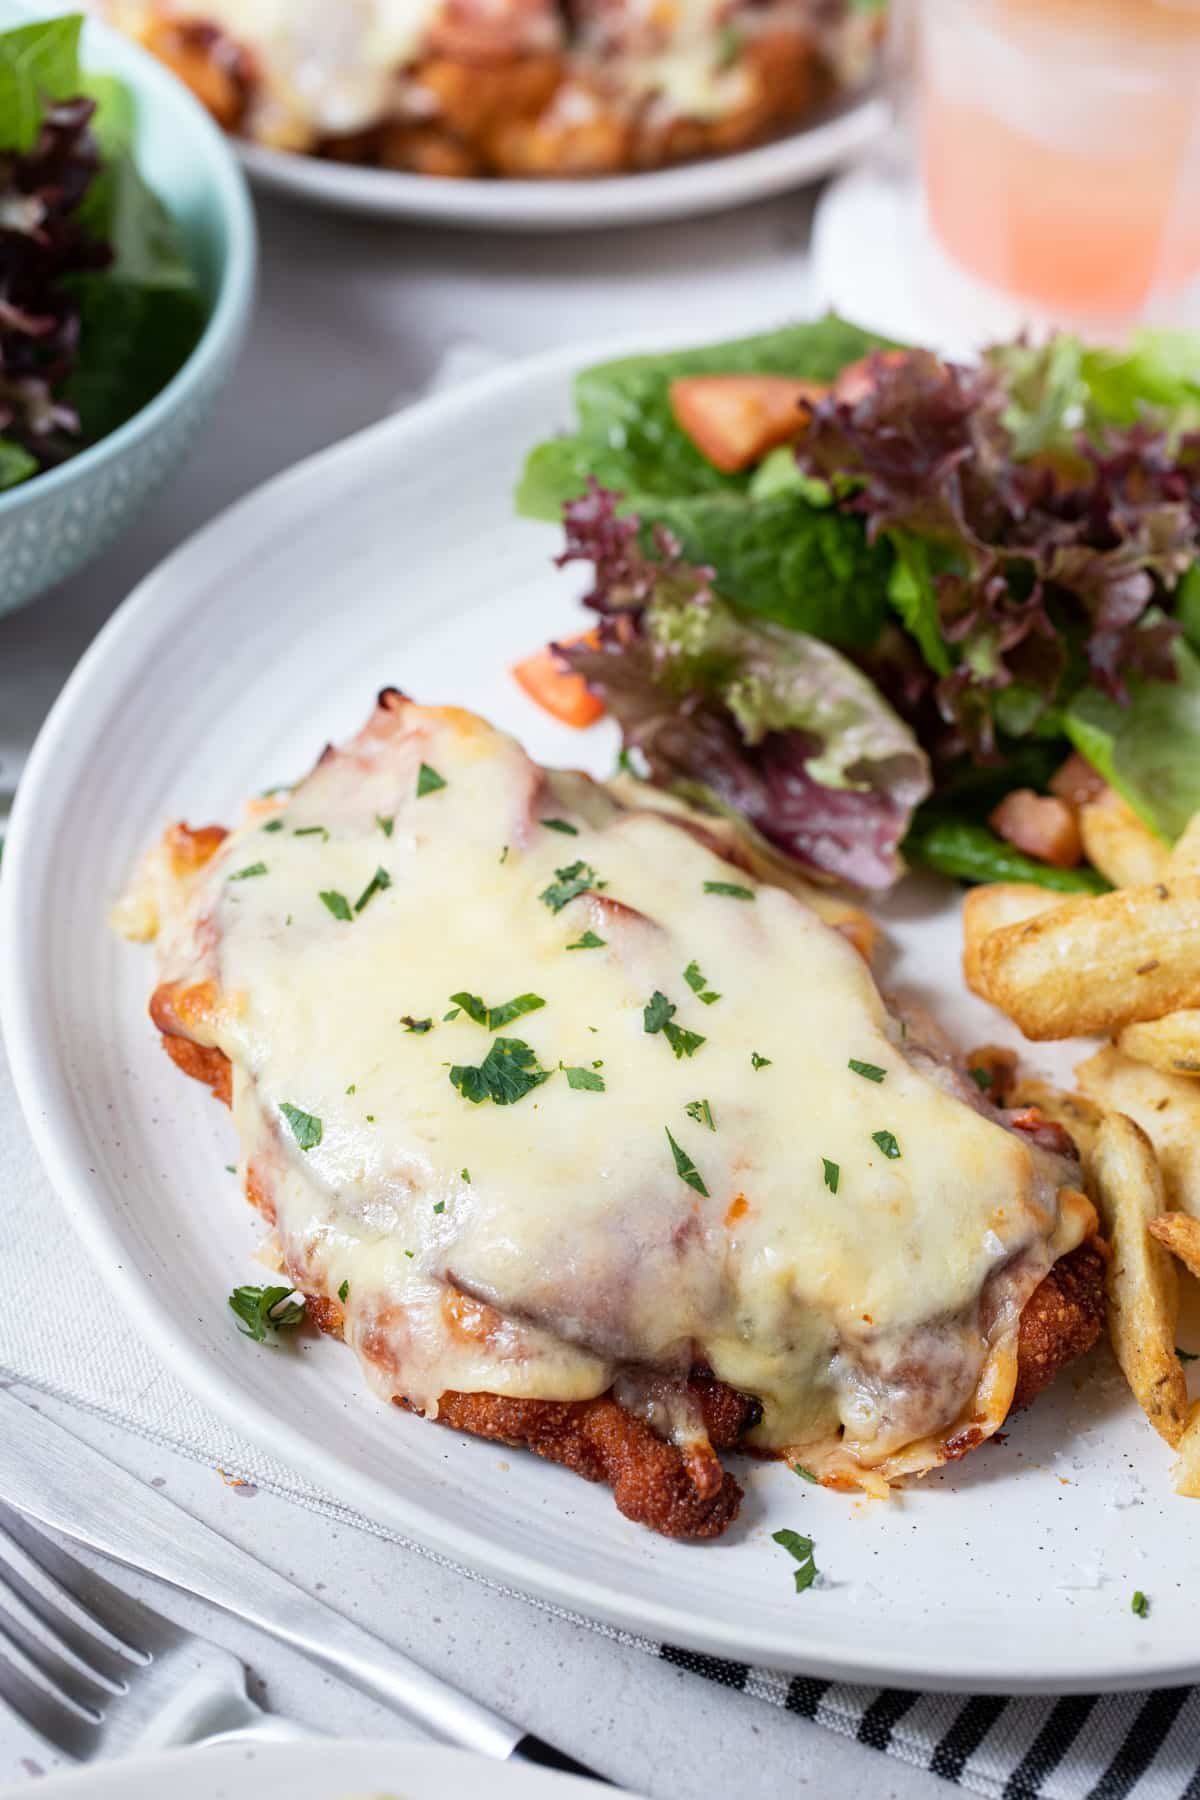 chicken parmigiana topped with ham and cheese on a plate with chips and salad.